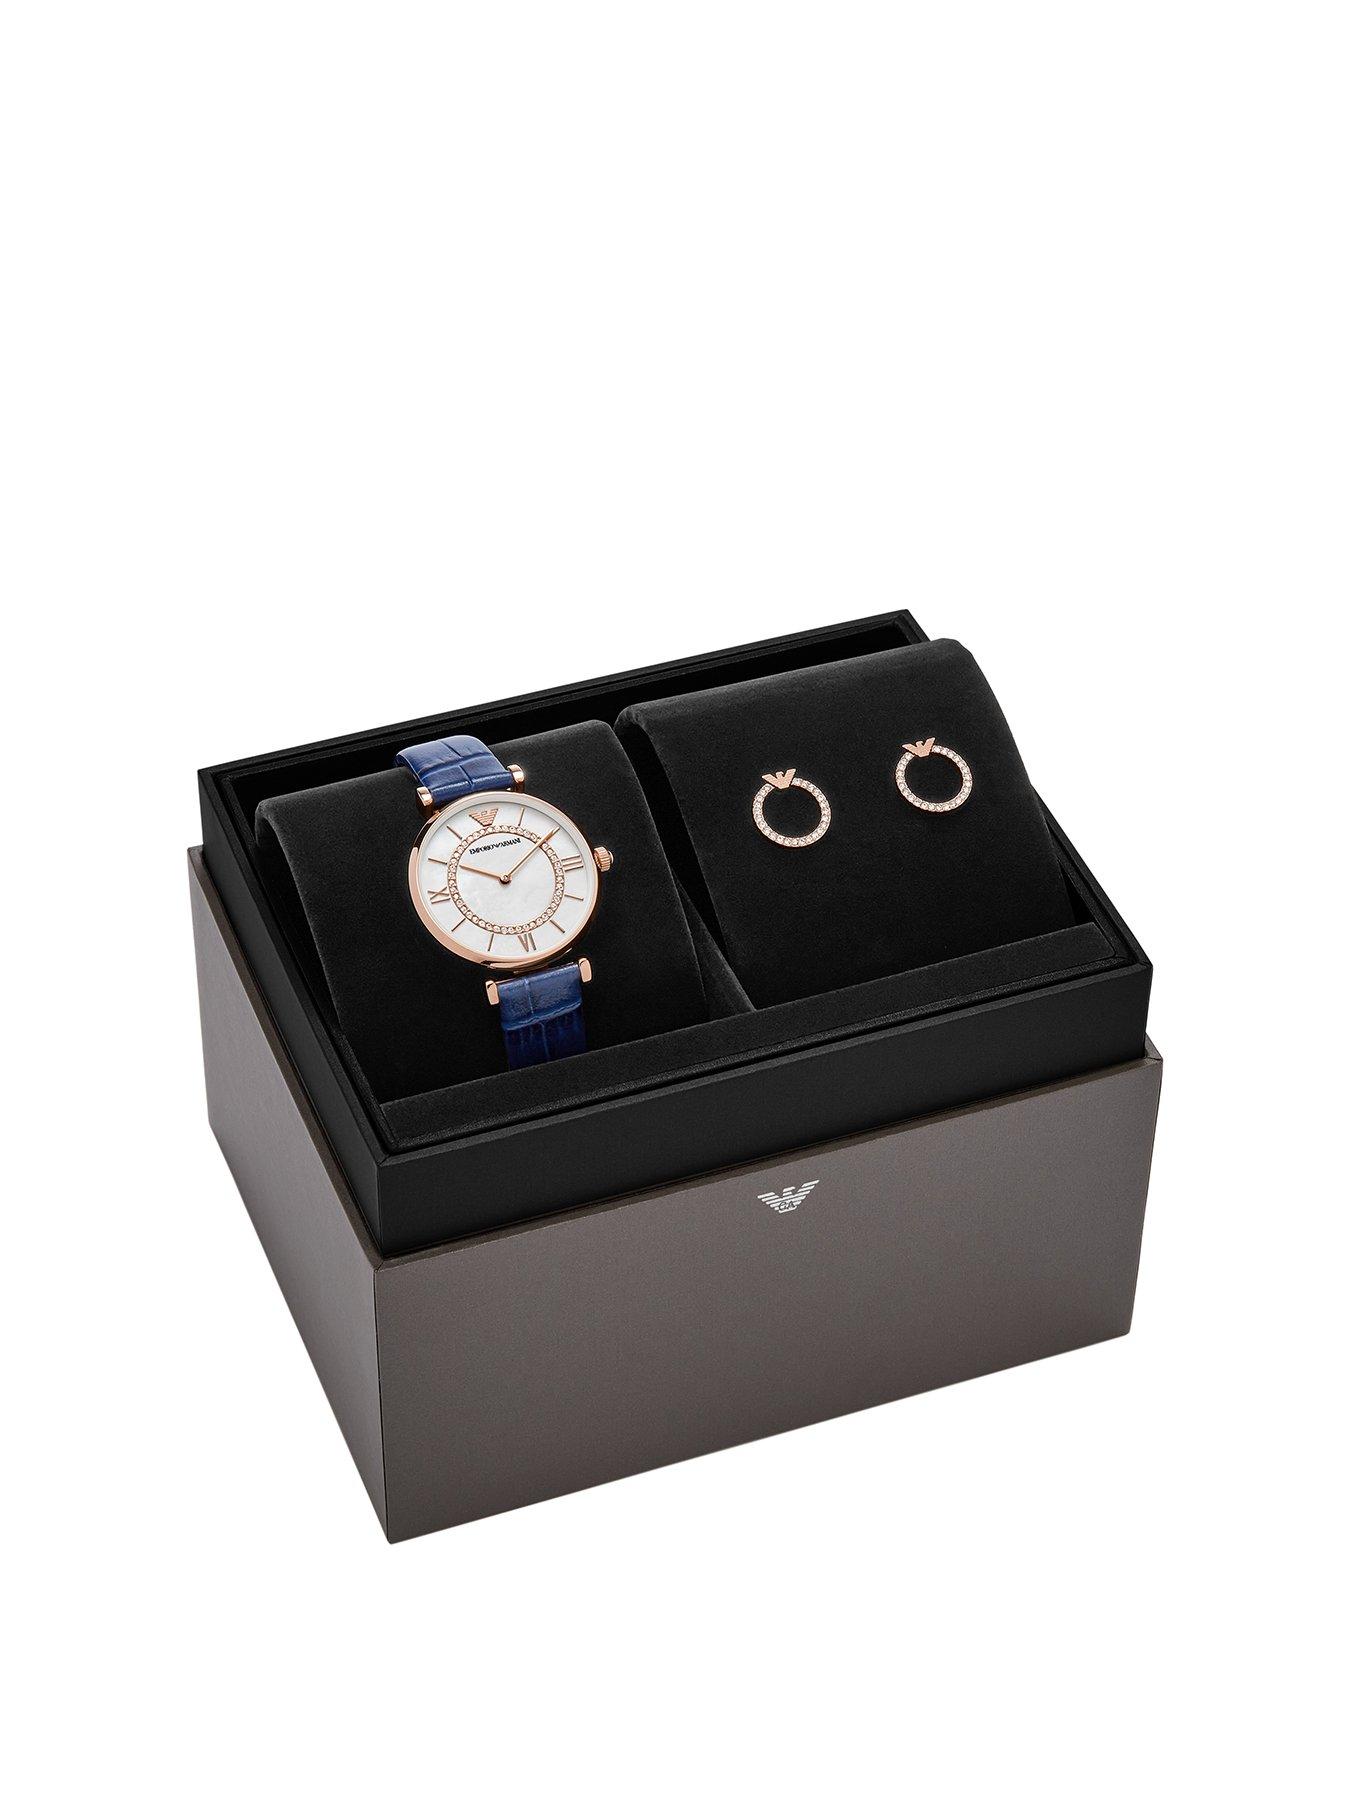 Jewellery & watches Leather Women's Watch and Earrings Gift Set